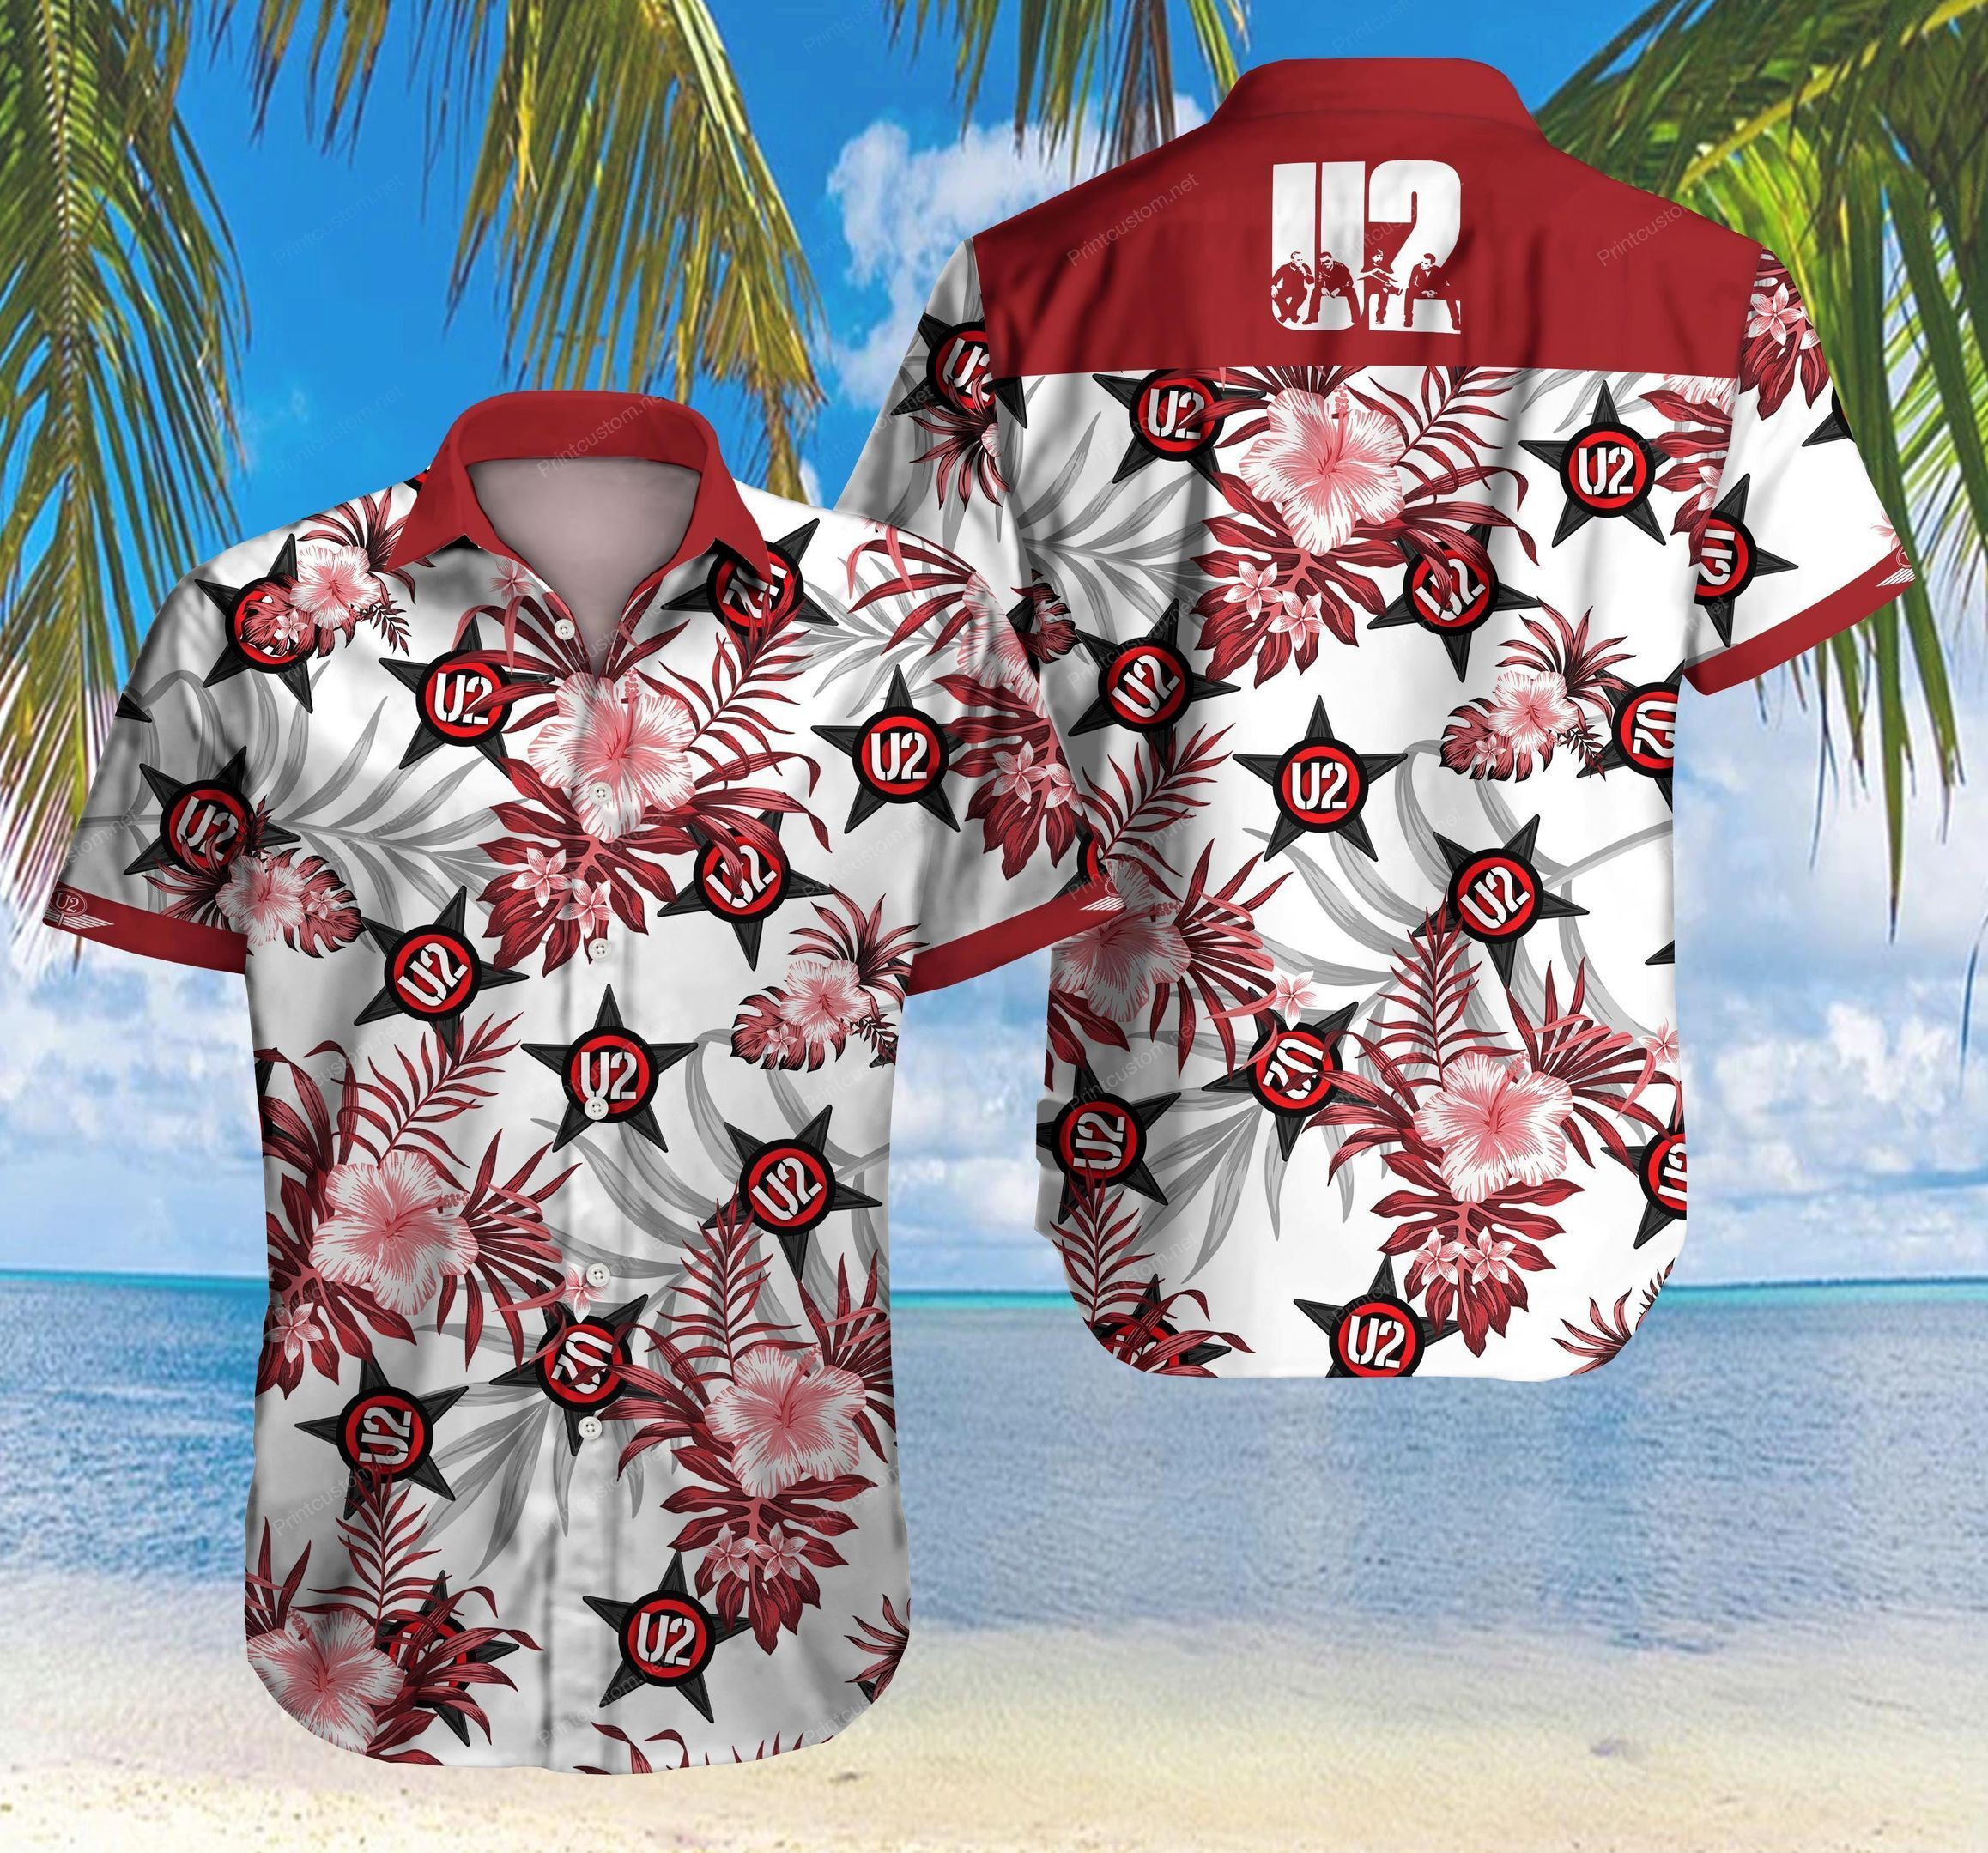 These Hawaiian shirt are an excellent choice for family outings 56